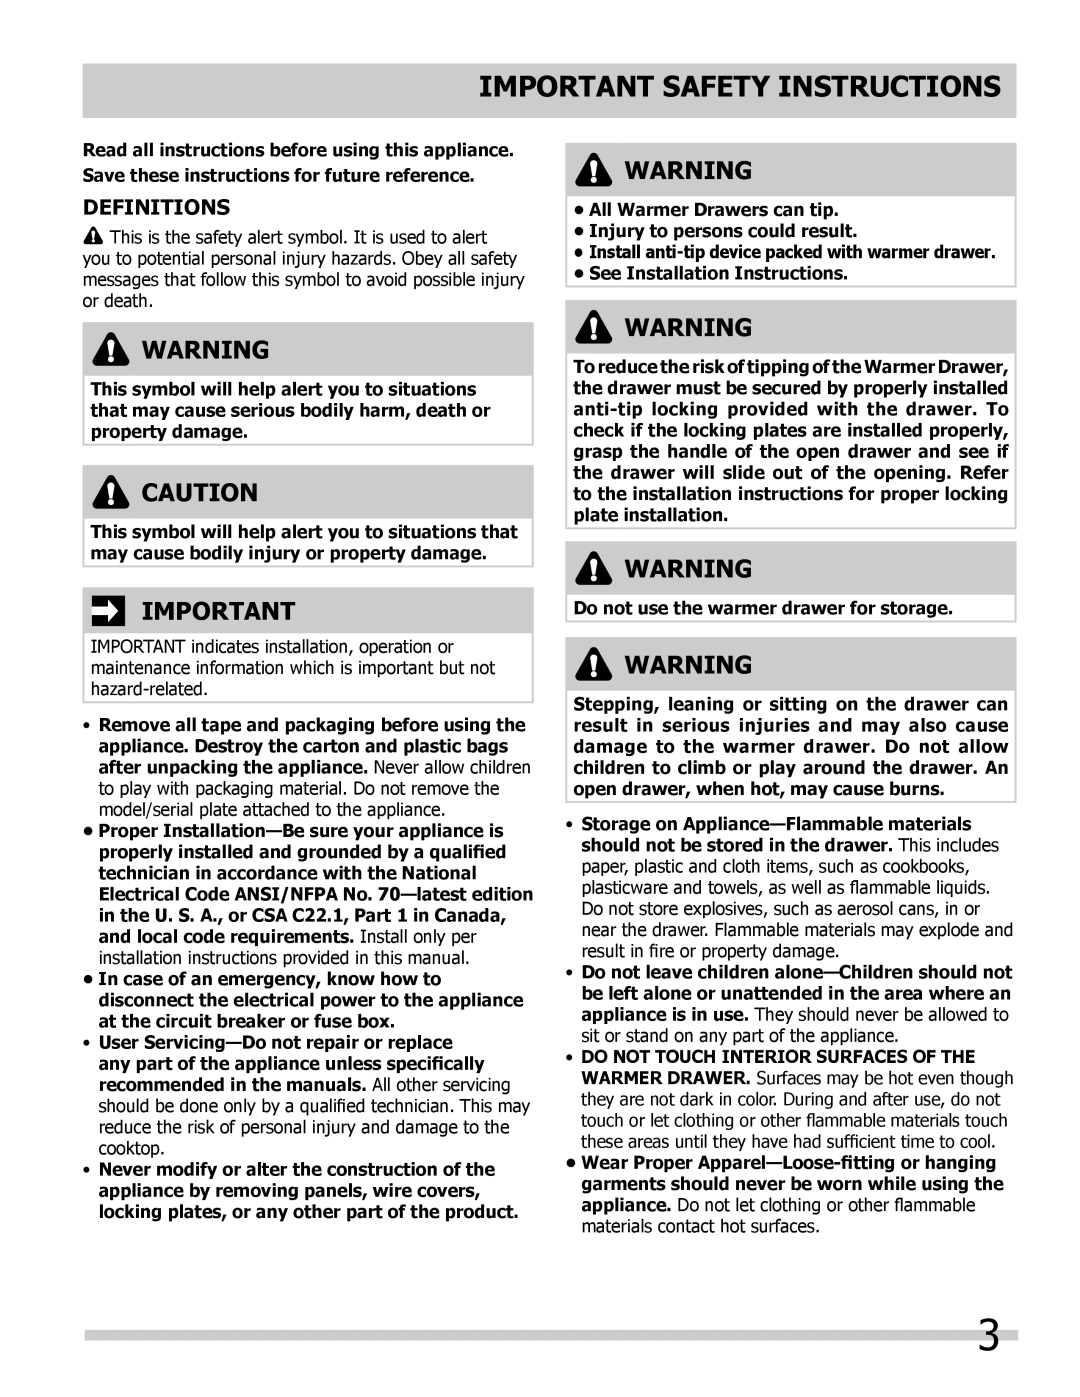 Frigidaire 318201024 important safety instructions Important Safety Instructions, Definitions 